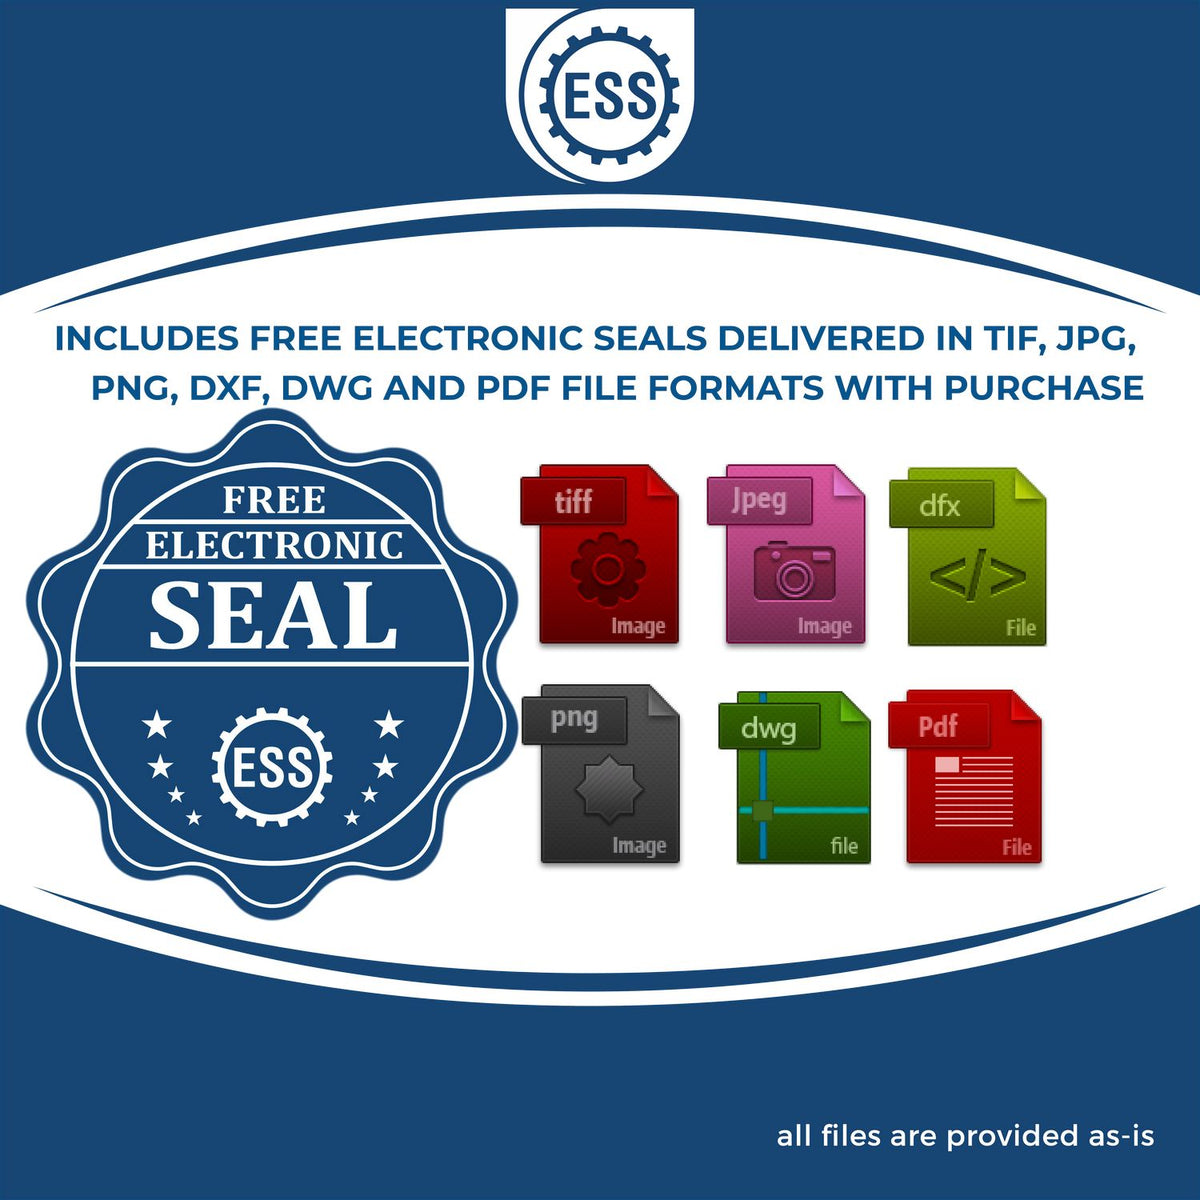 An infographic for the free electronic seal for the Nebraska Engineer Desk Seal illustrating the different file type icons such as DXF, DWG, TIF, JPG and PNG.